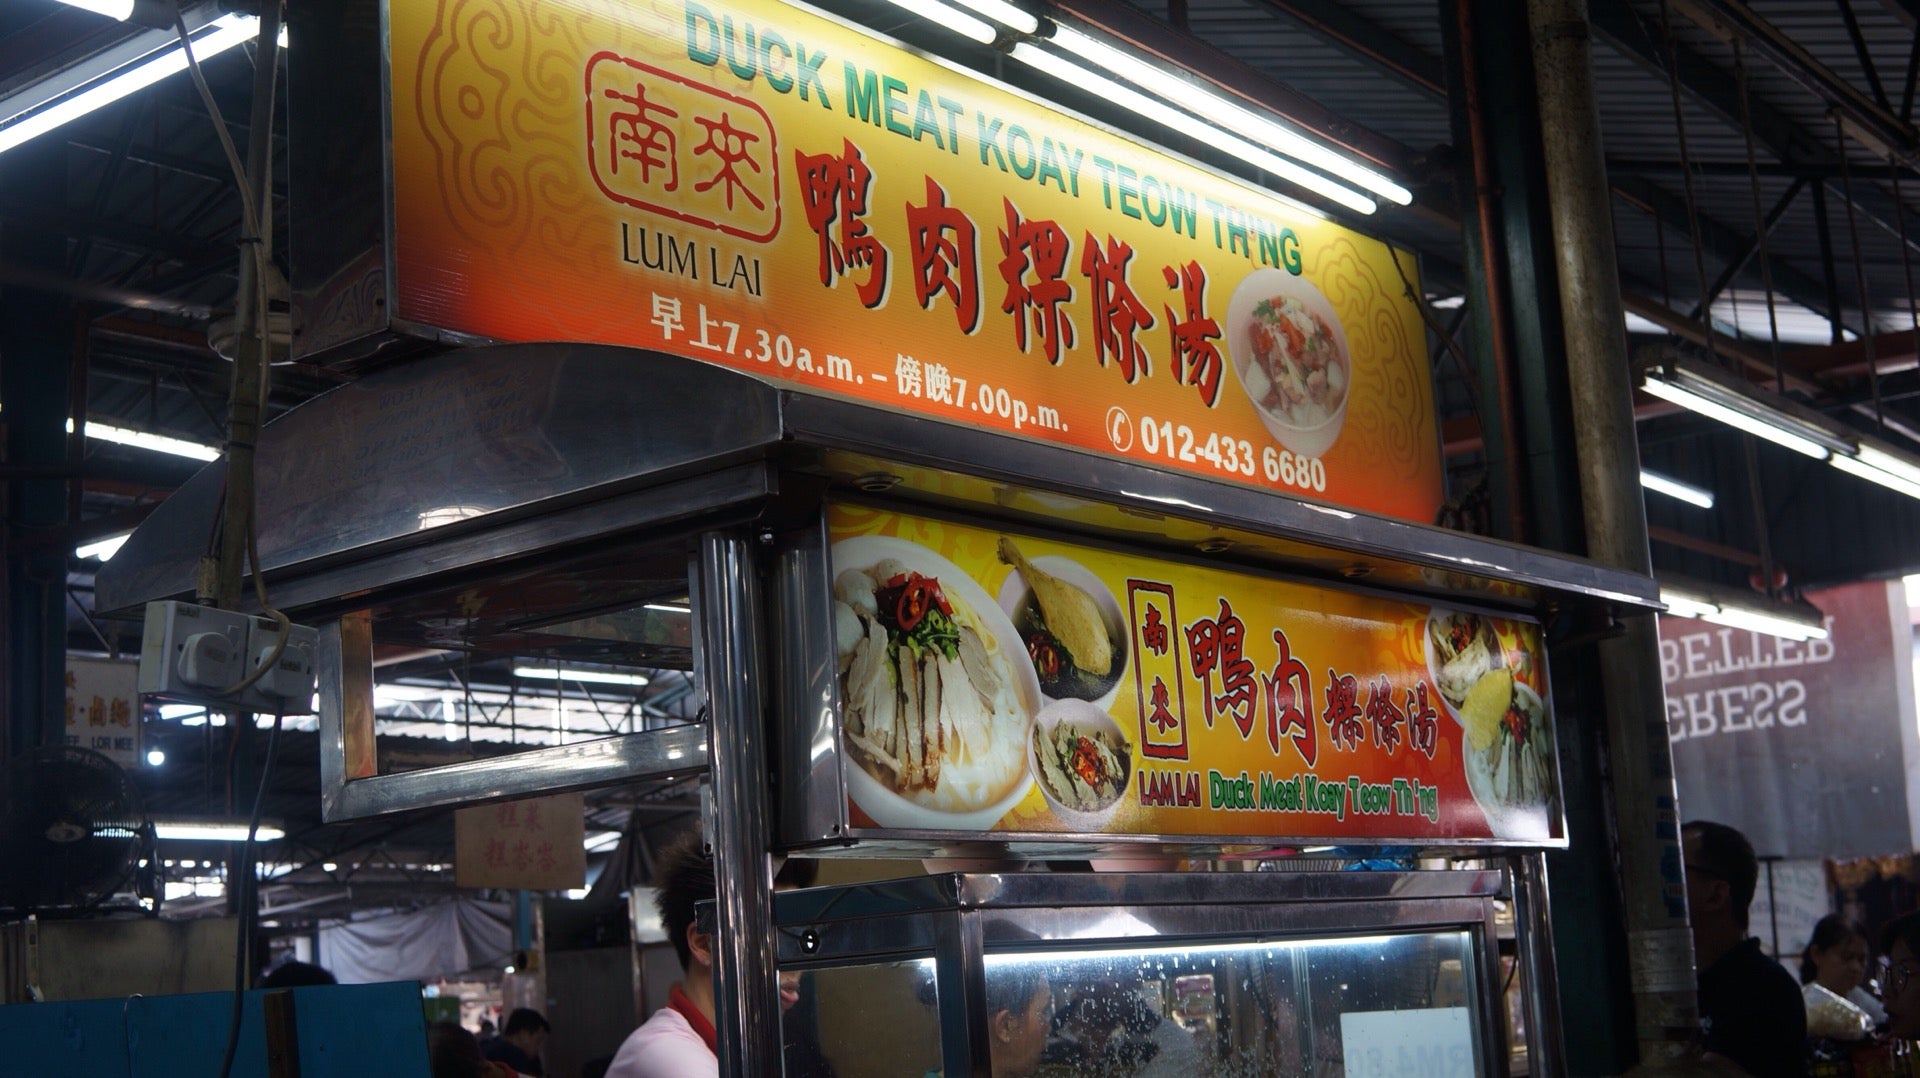 Lum Lai Duck Meat Koay Teow Th'ng